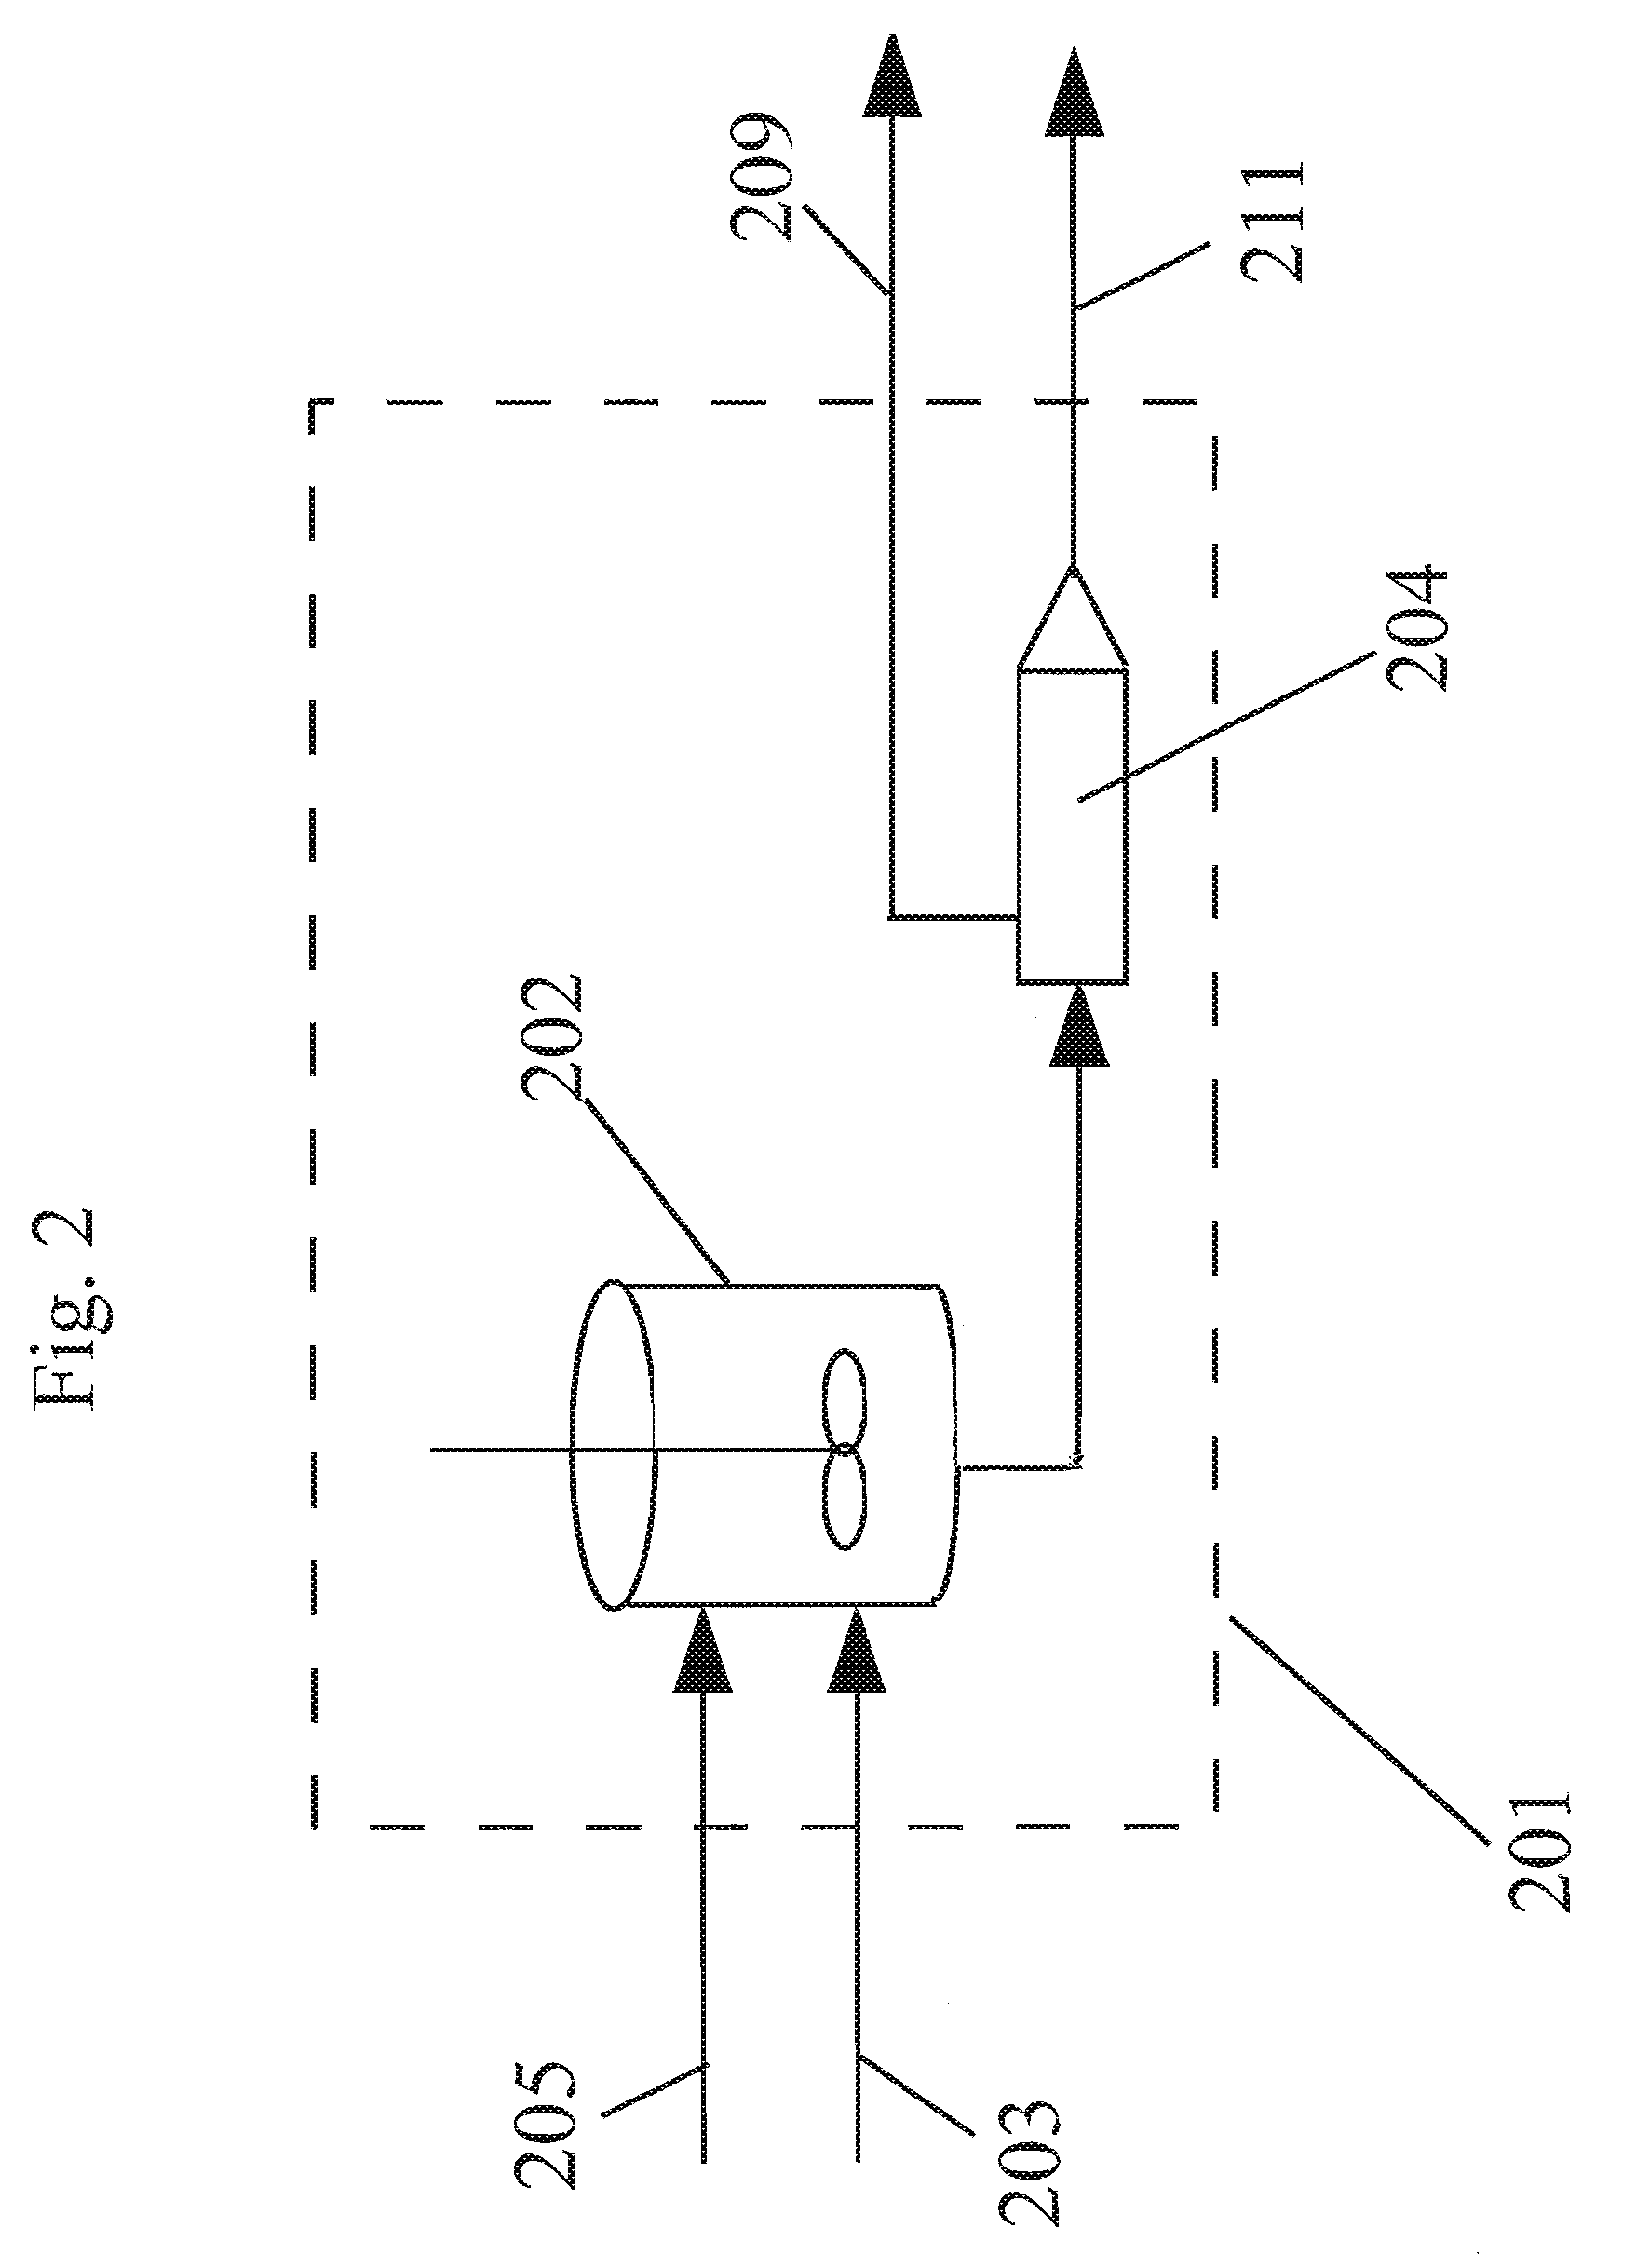 Method of forming polycarbonate